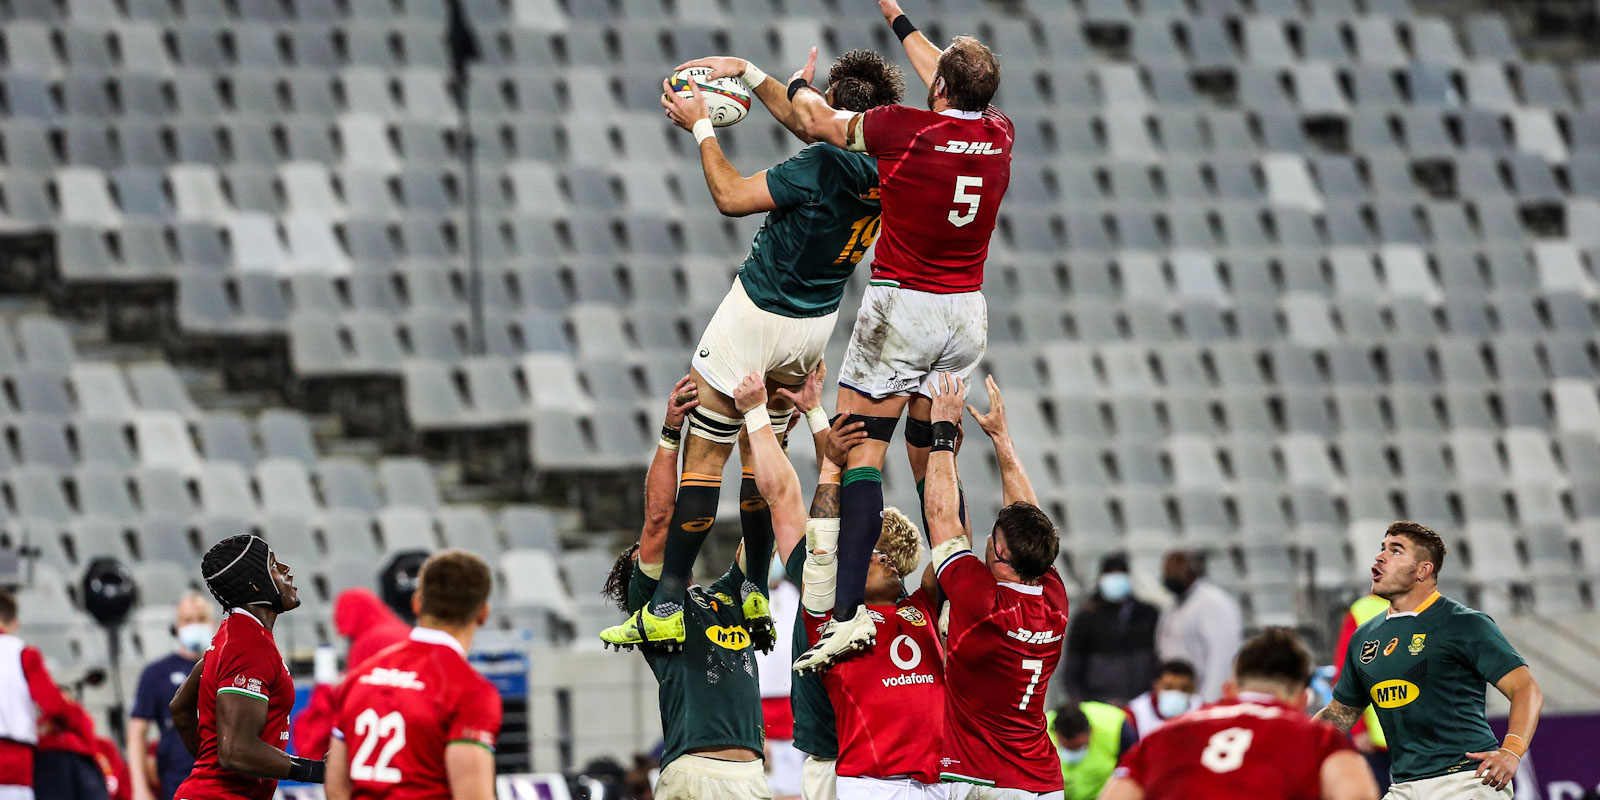 Lood de Jager poaches a Lions lineout in the second Test.